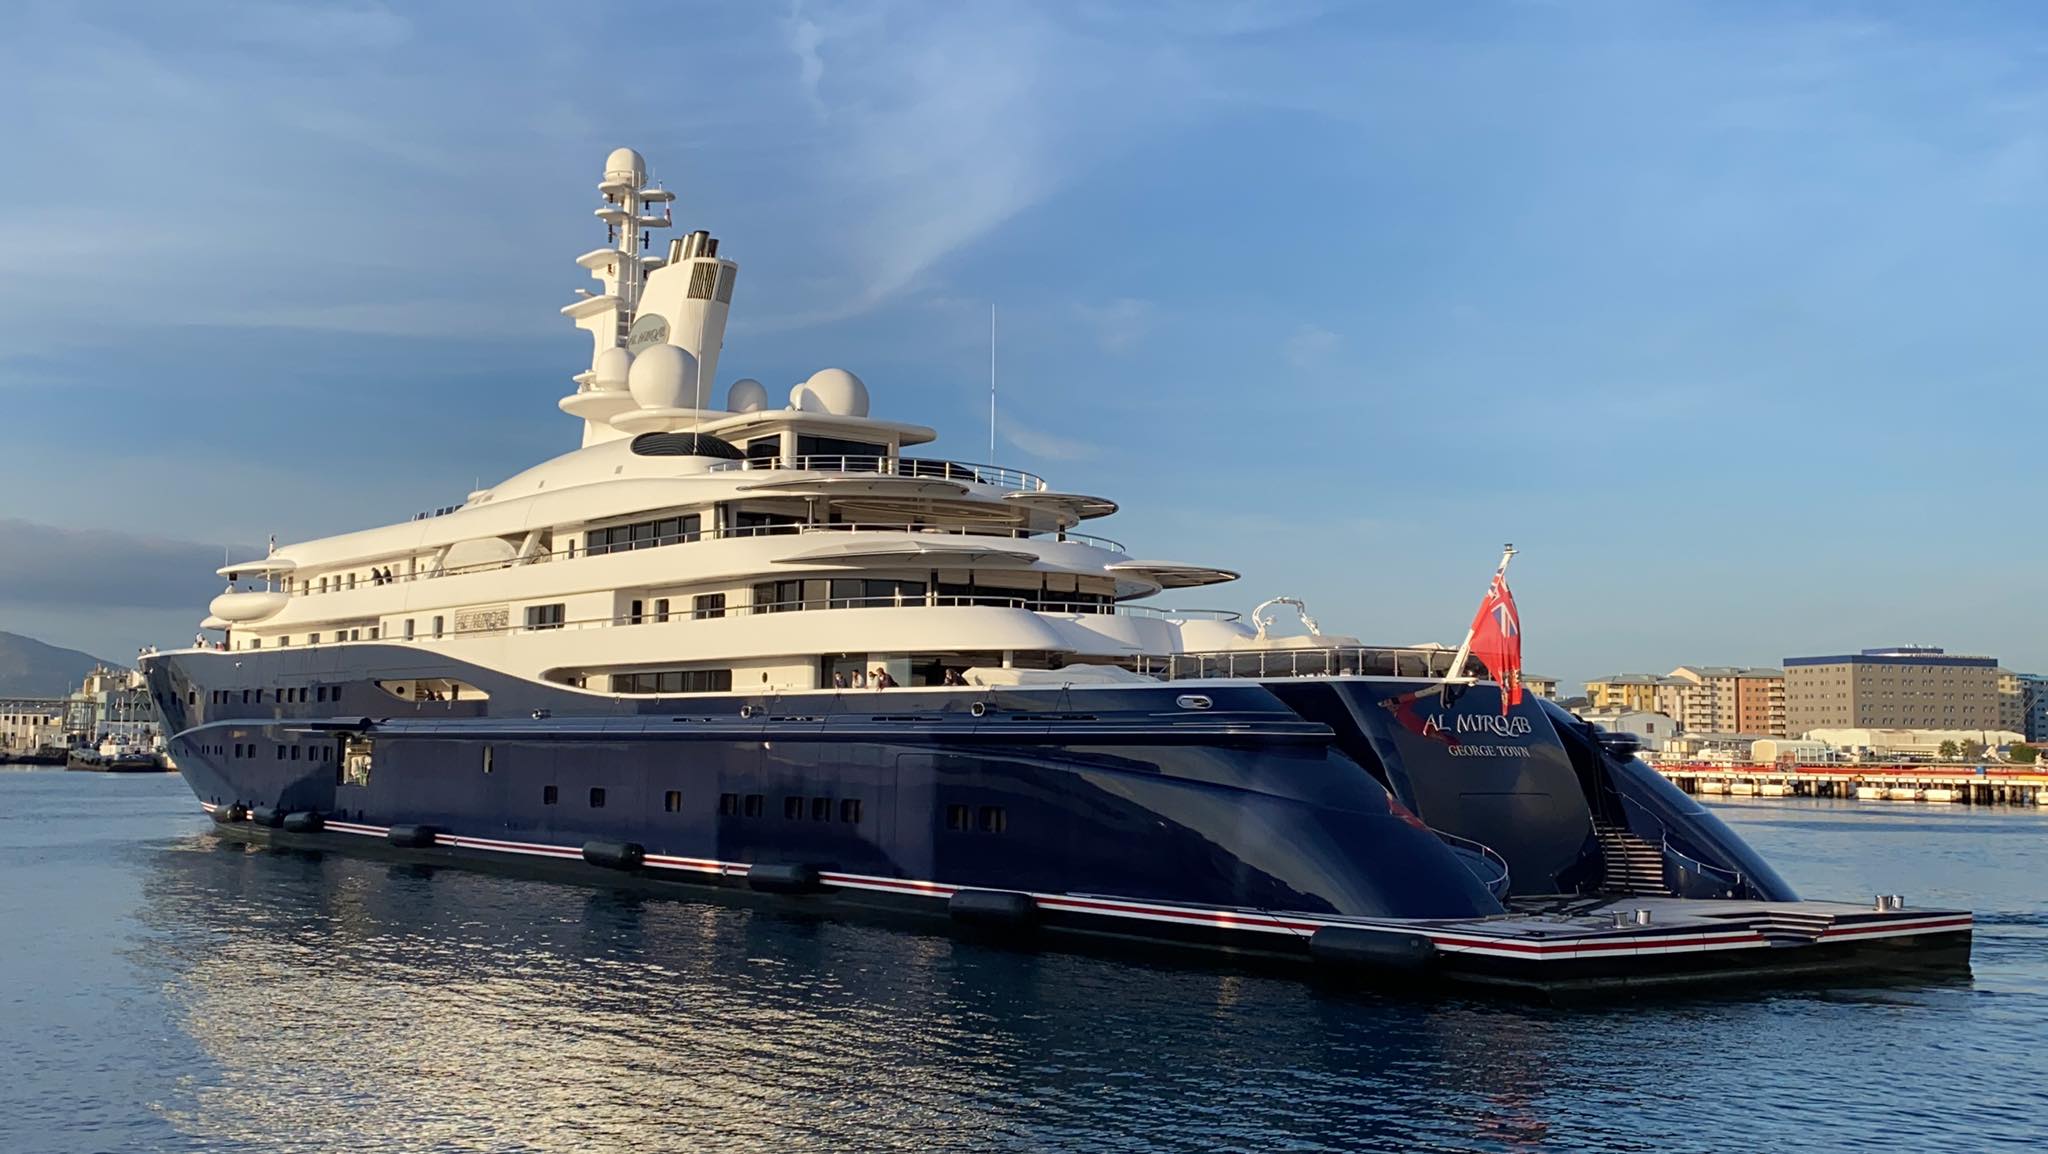 The yacht Al Mirqab arrived in Gibraltar